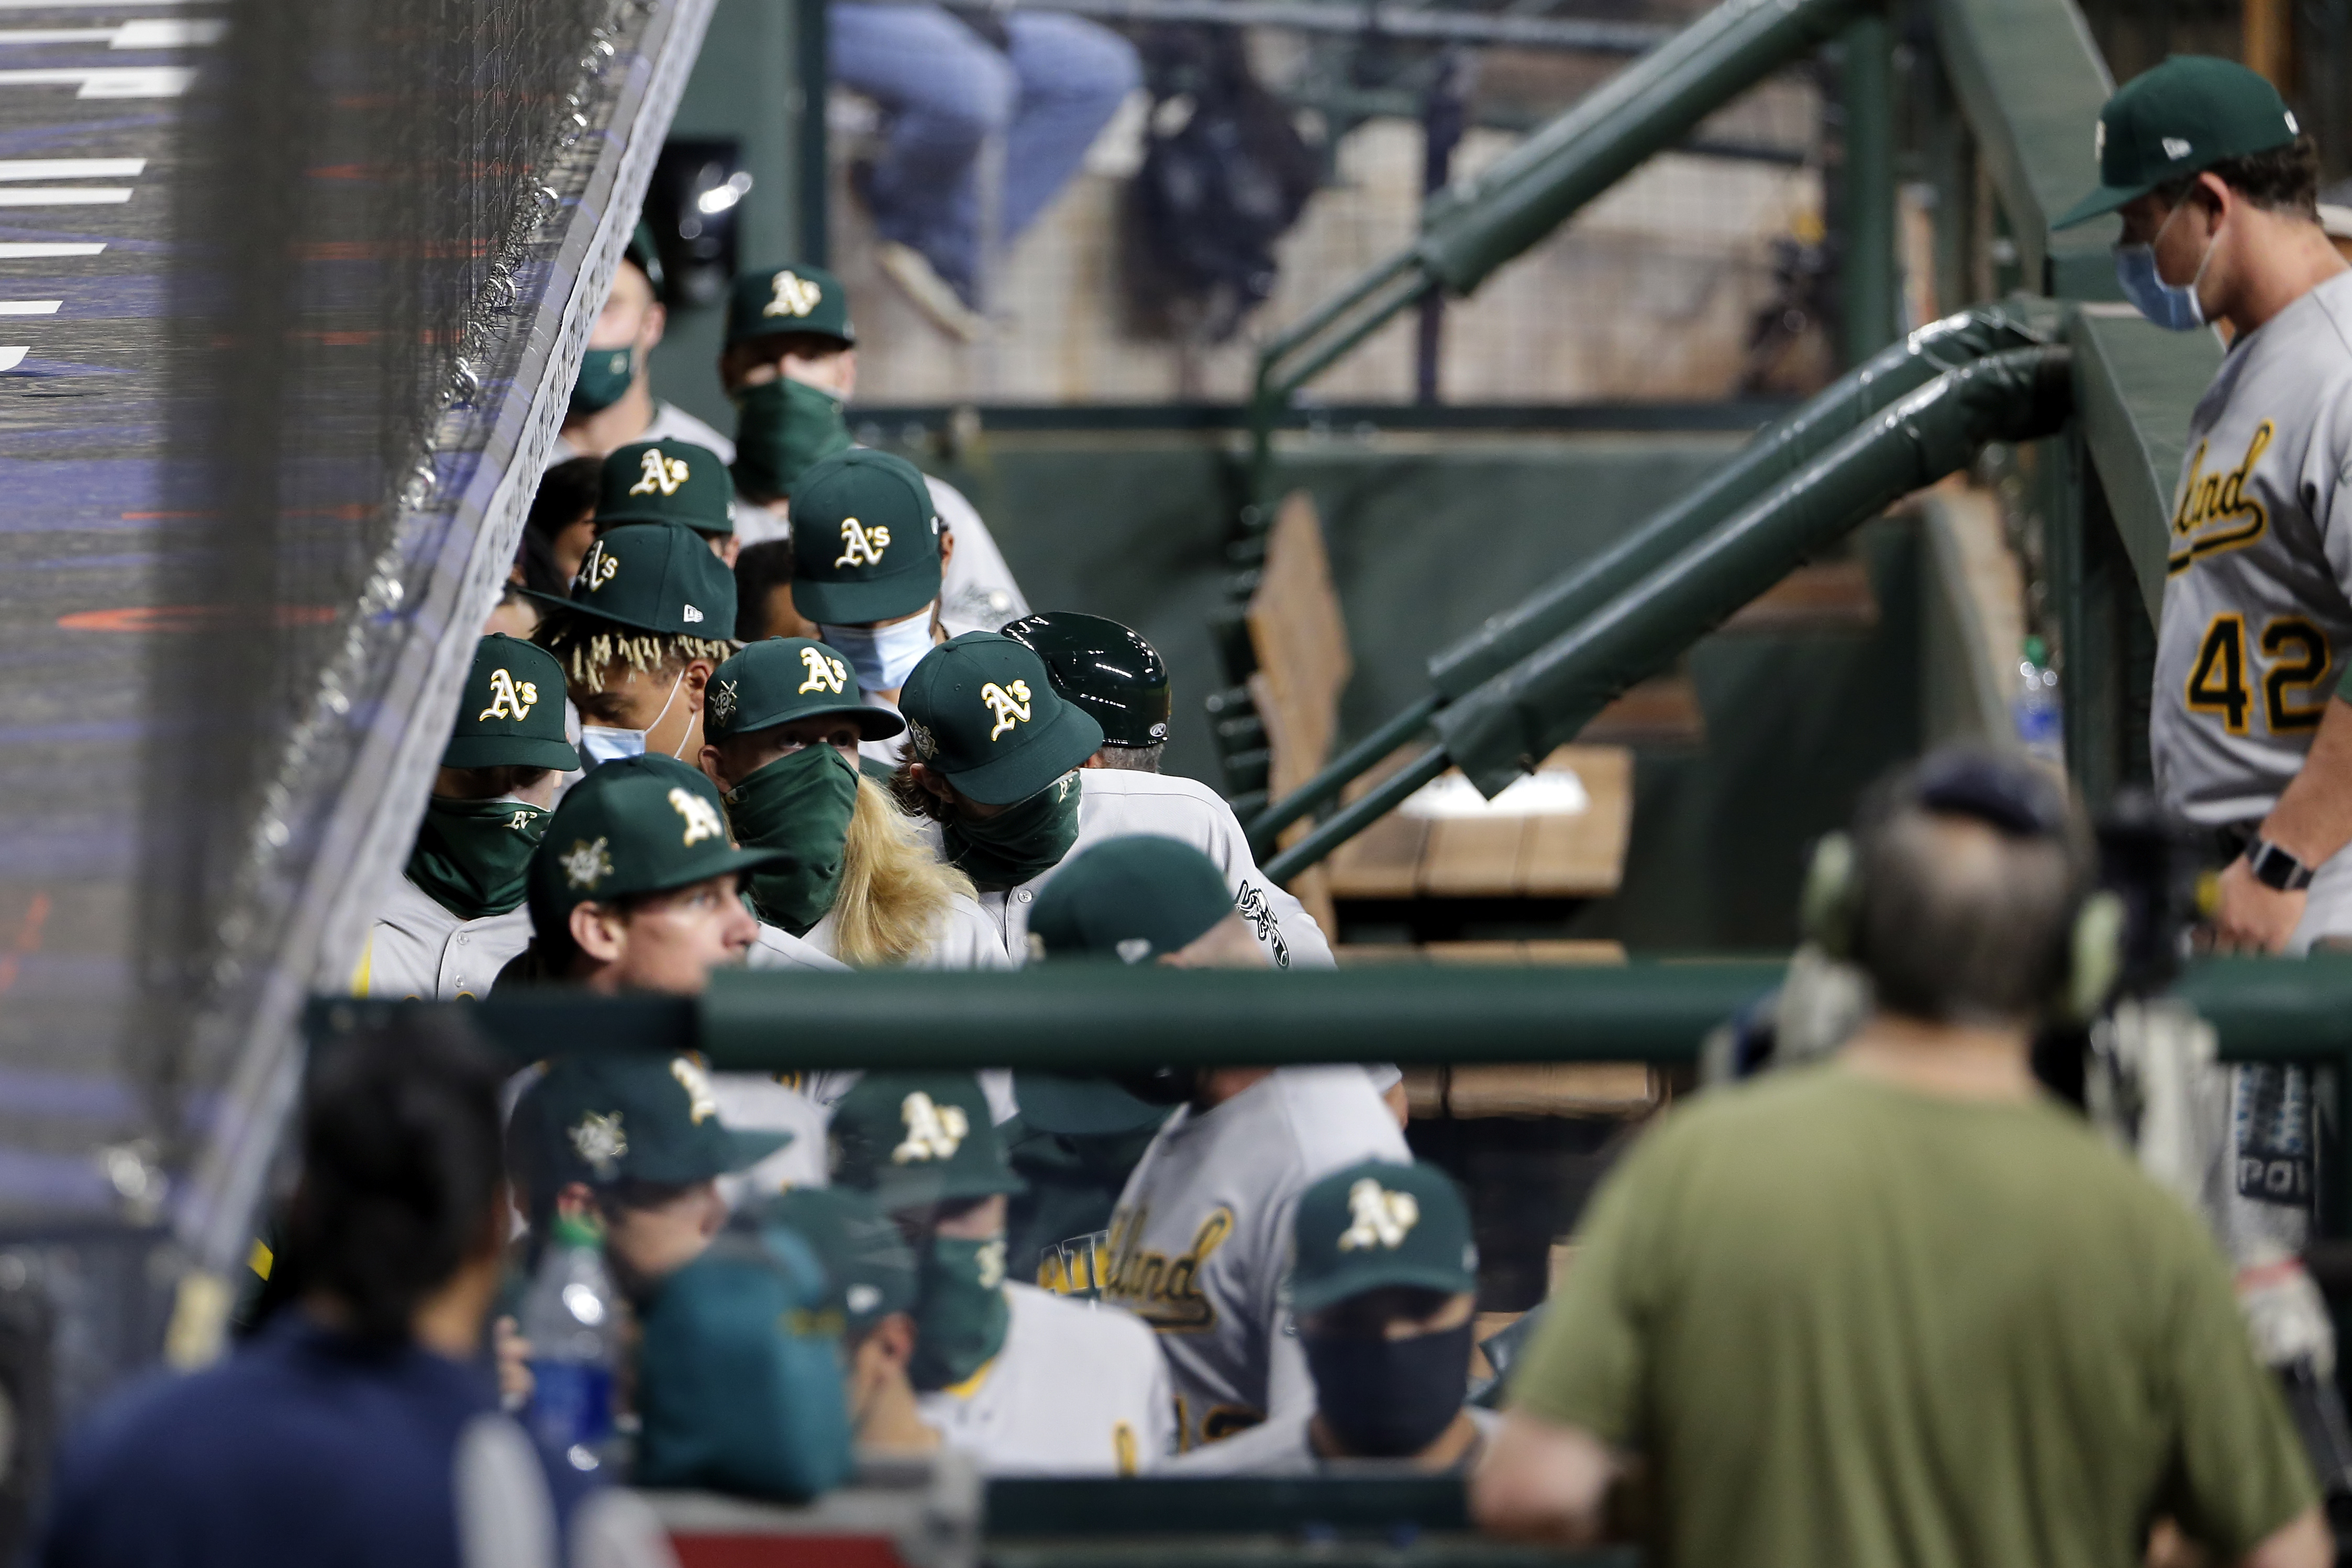 A's, Astros walk off field in protest, game postponed - The Sumter Item